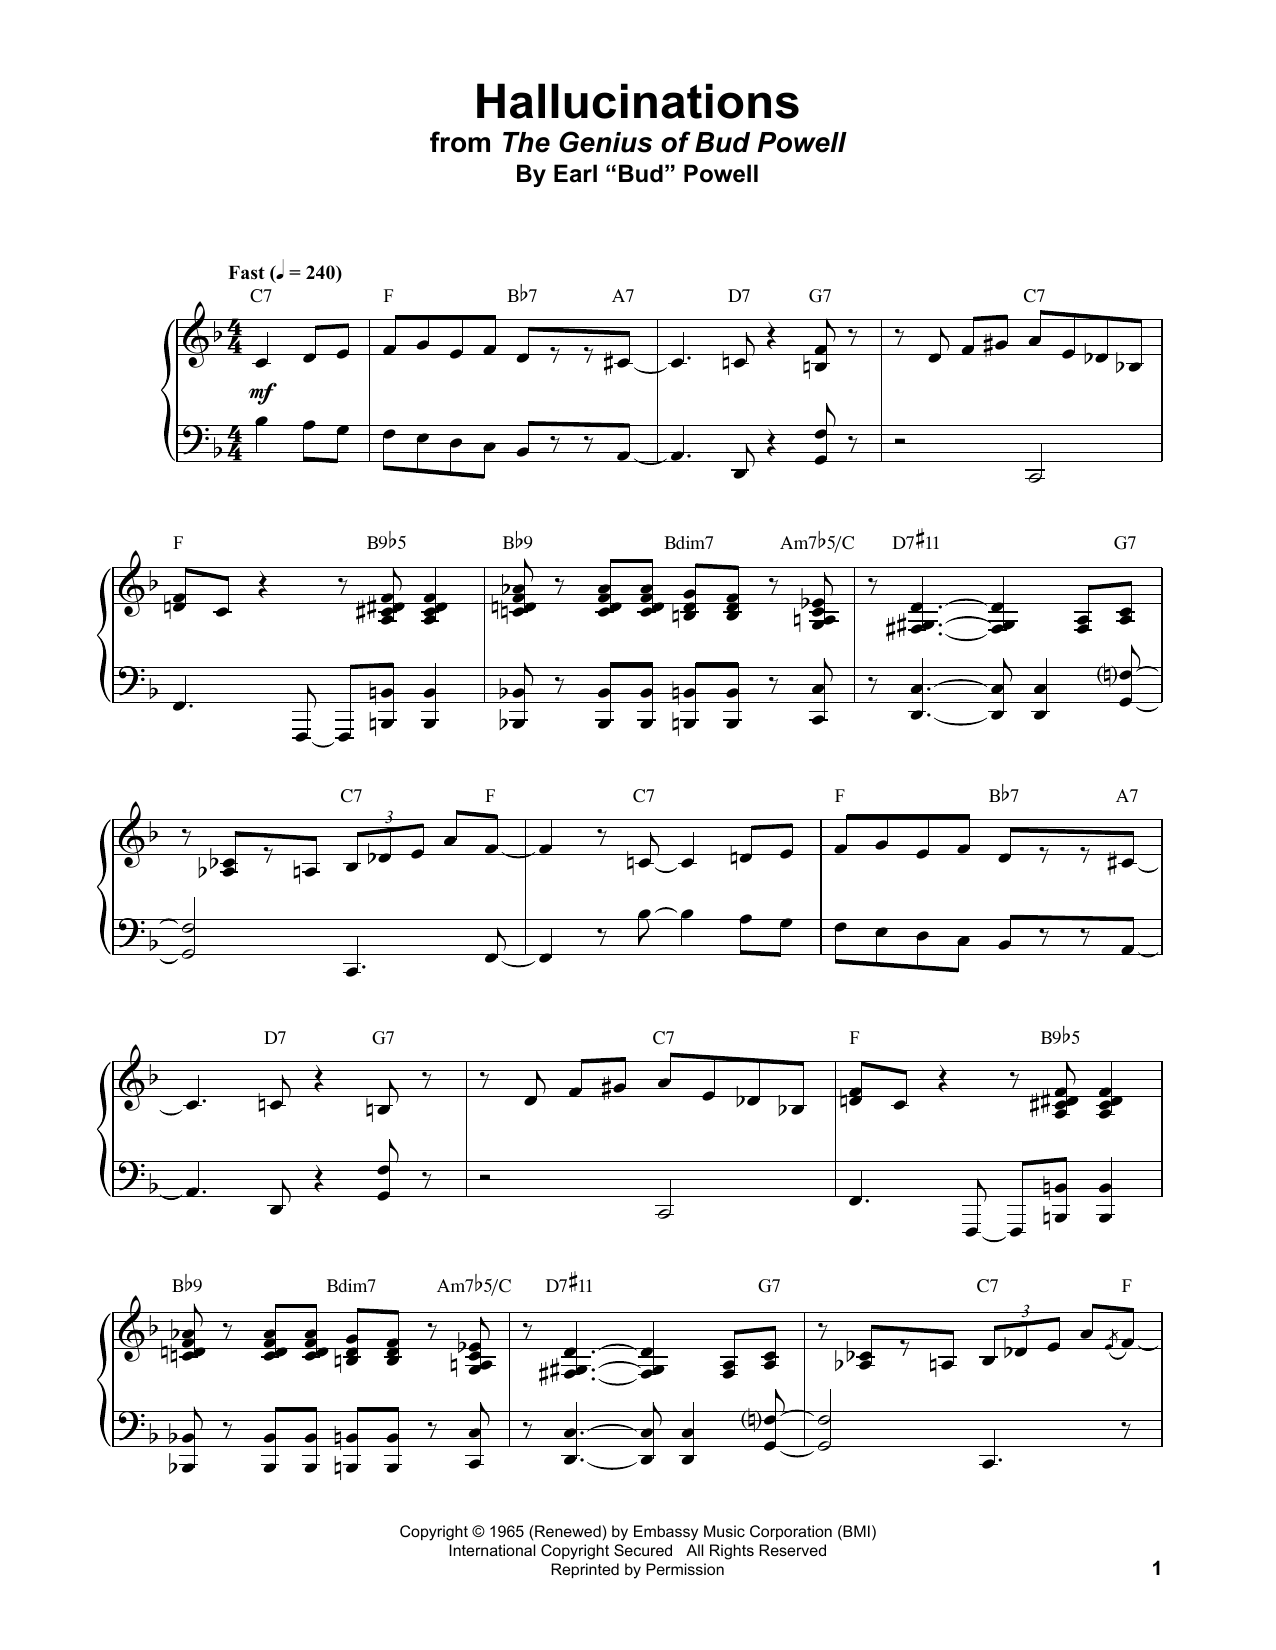 Download Bud Powell Hallucinations Sheet Music